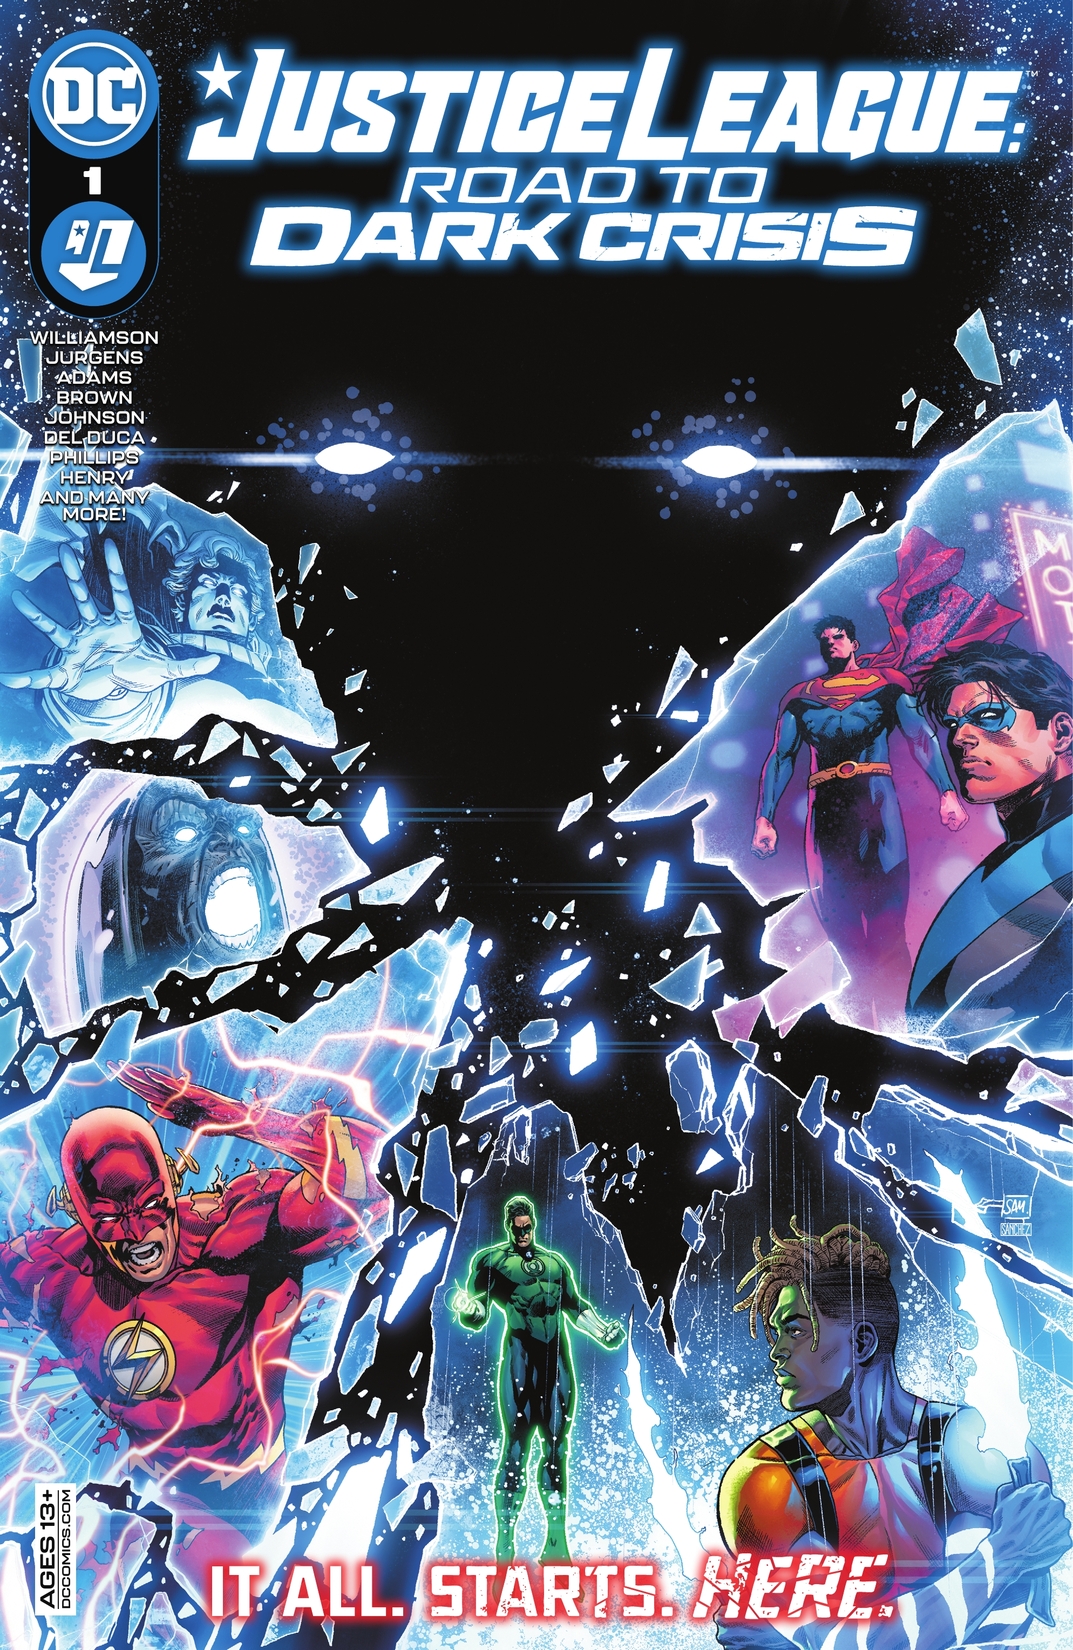 Justice League: Road to Dark Crisis (2022) #1 preview images